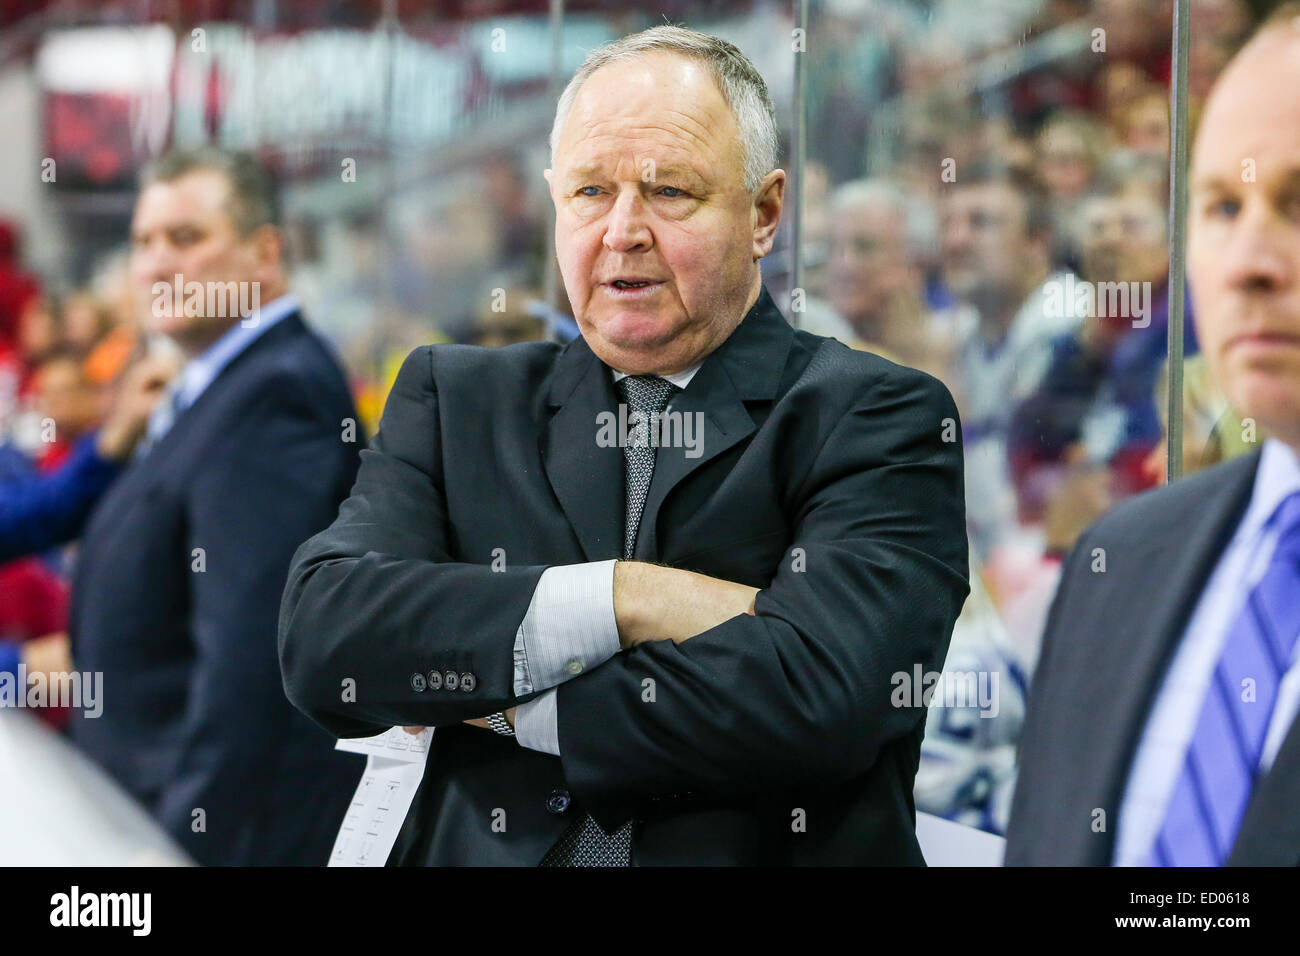 Toronto Maple Leafs head coach Randy Carlyle during the NHL game between the Toronto Maple Leafs and the Carolina Hurricanes at the PNC Arena.  The Carolina Hurricanes defeated the Toronto Maple Leafs 4-1. Stock Photo